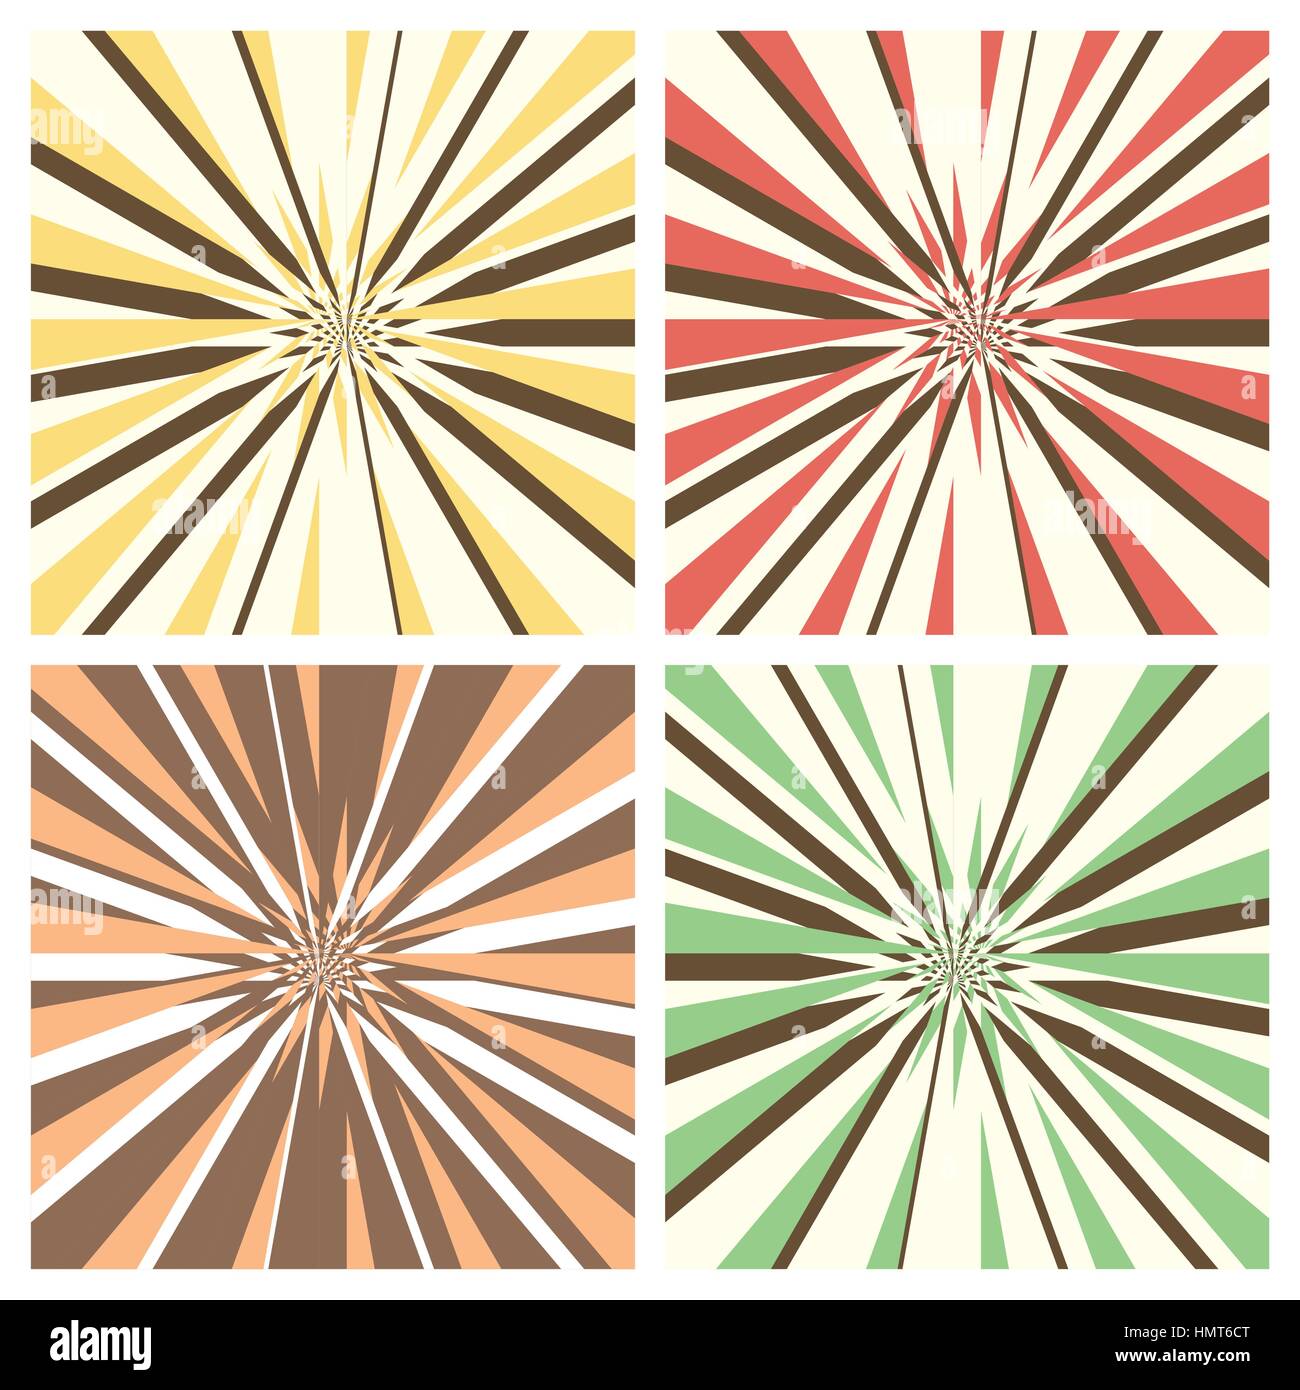 Set of abstract radial sunburst backgrounds. Retro style circular light rays scattered behind. Starburst pattern with radially placed beams. Vector ep Stock Vector